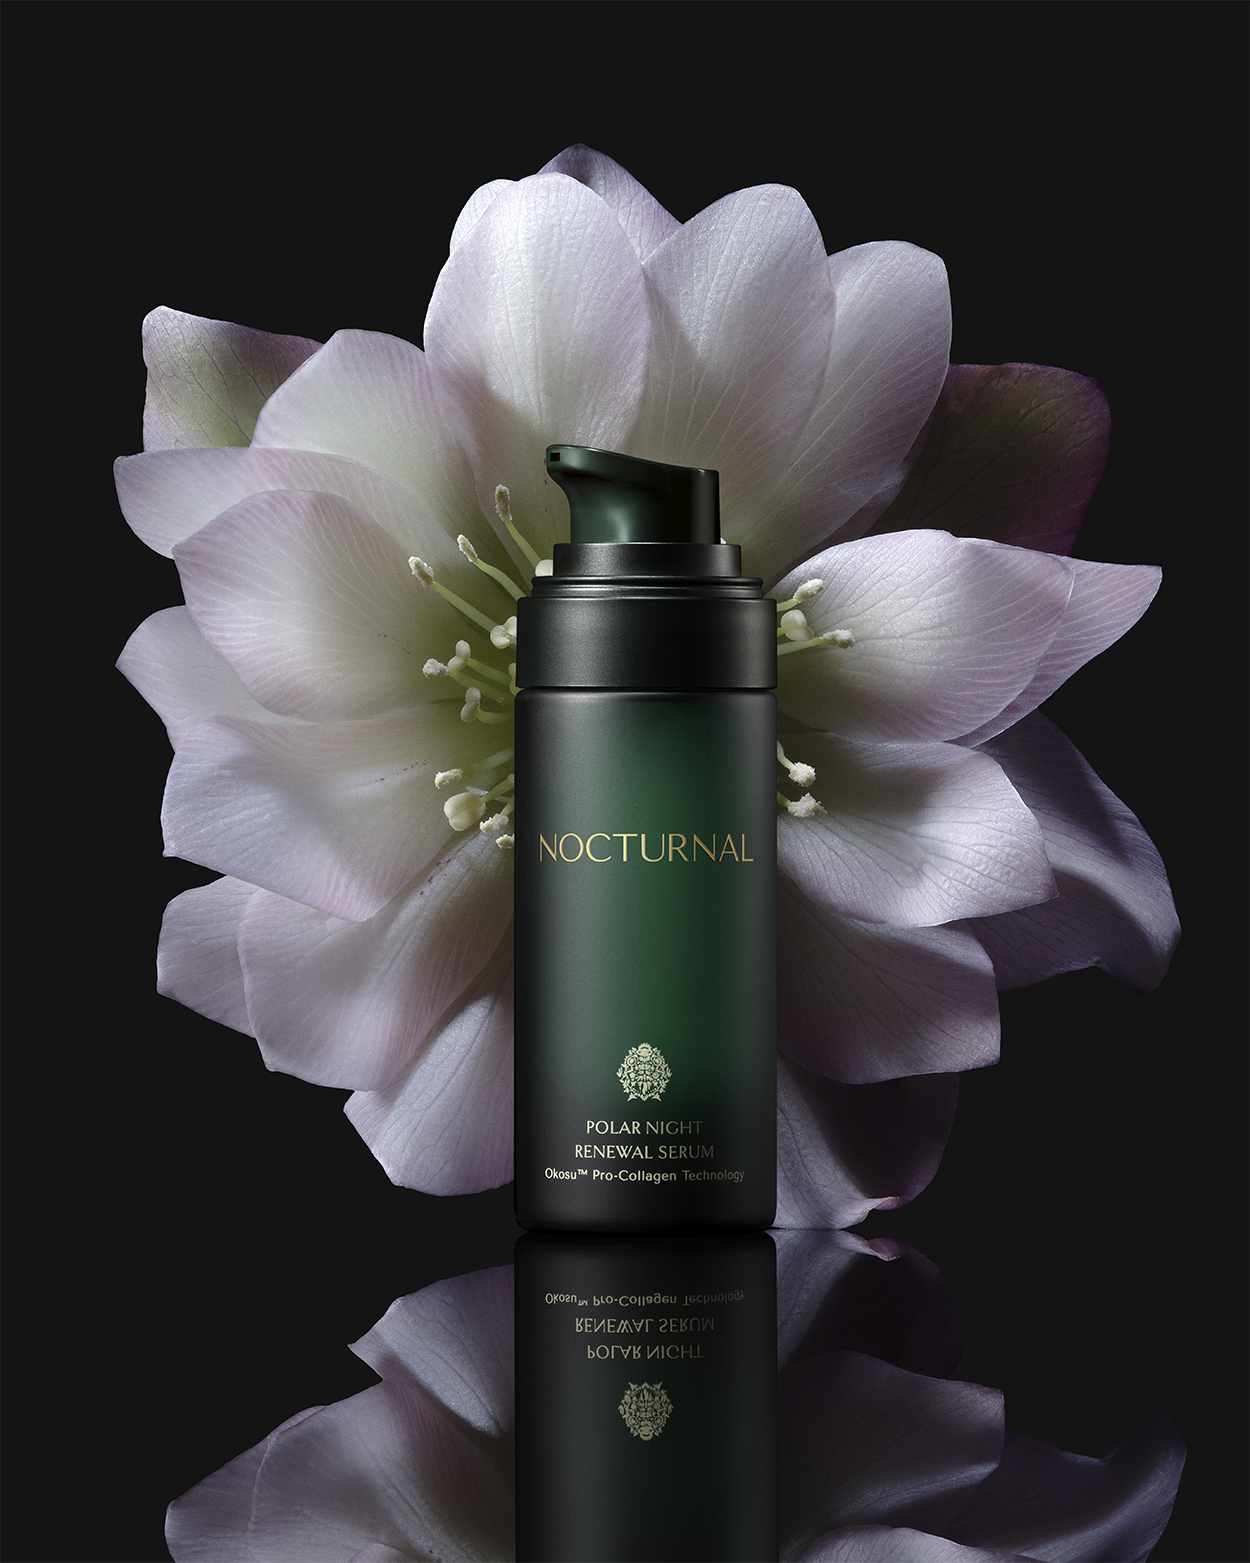 This is full size the Polar Night Anti-aging renewal serum. It is a dark green glass bottle with the cap off. The bottle is sitting in front of a beautiful night blooming flower. 